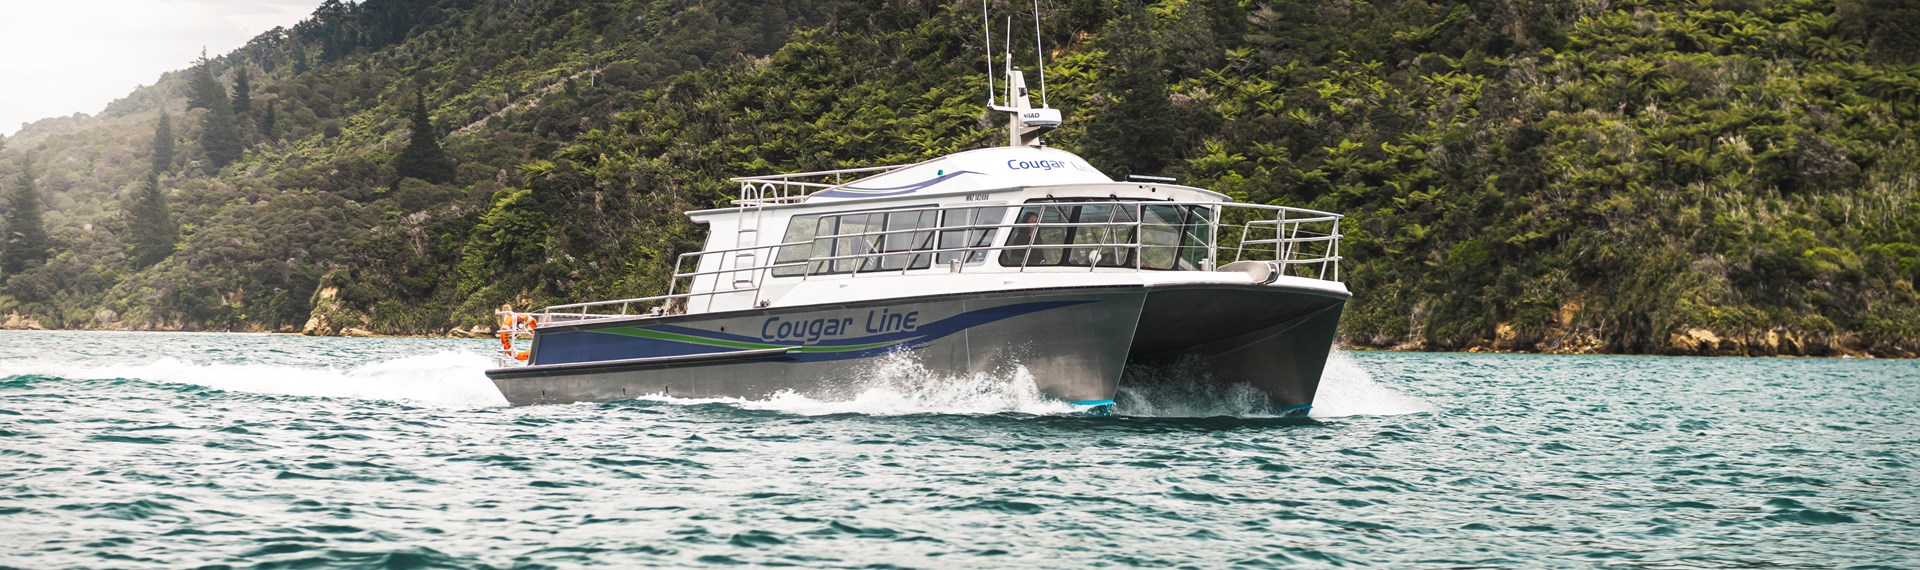 The name on the side of Cougar Line's Sounds Exciting boat sits above the boat's wake, while cruising the Marlborough Sounds, New Zealand